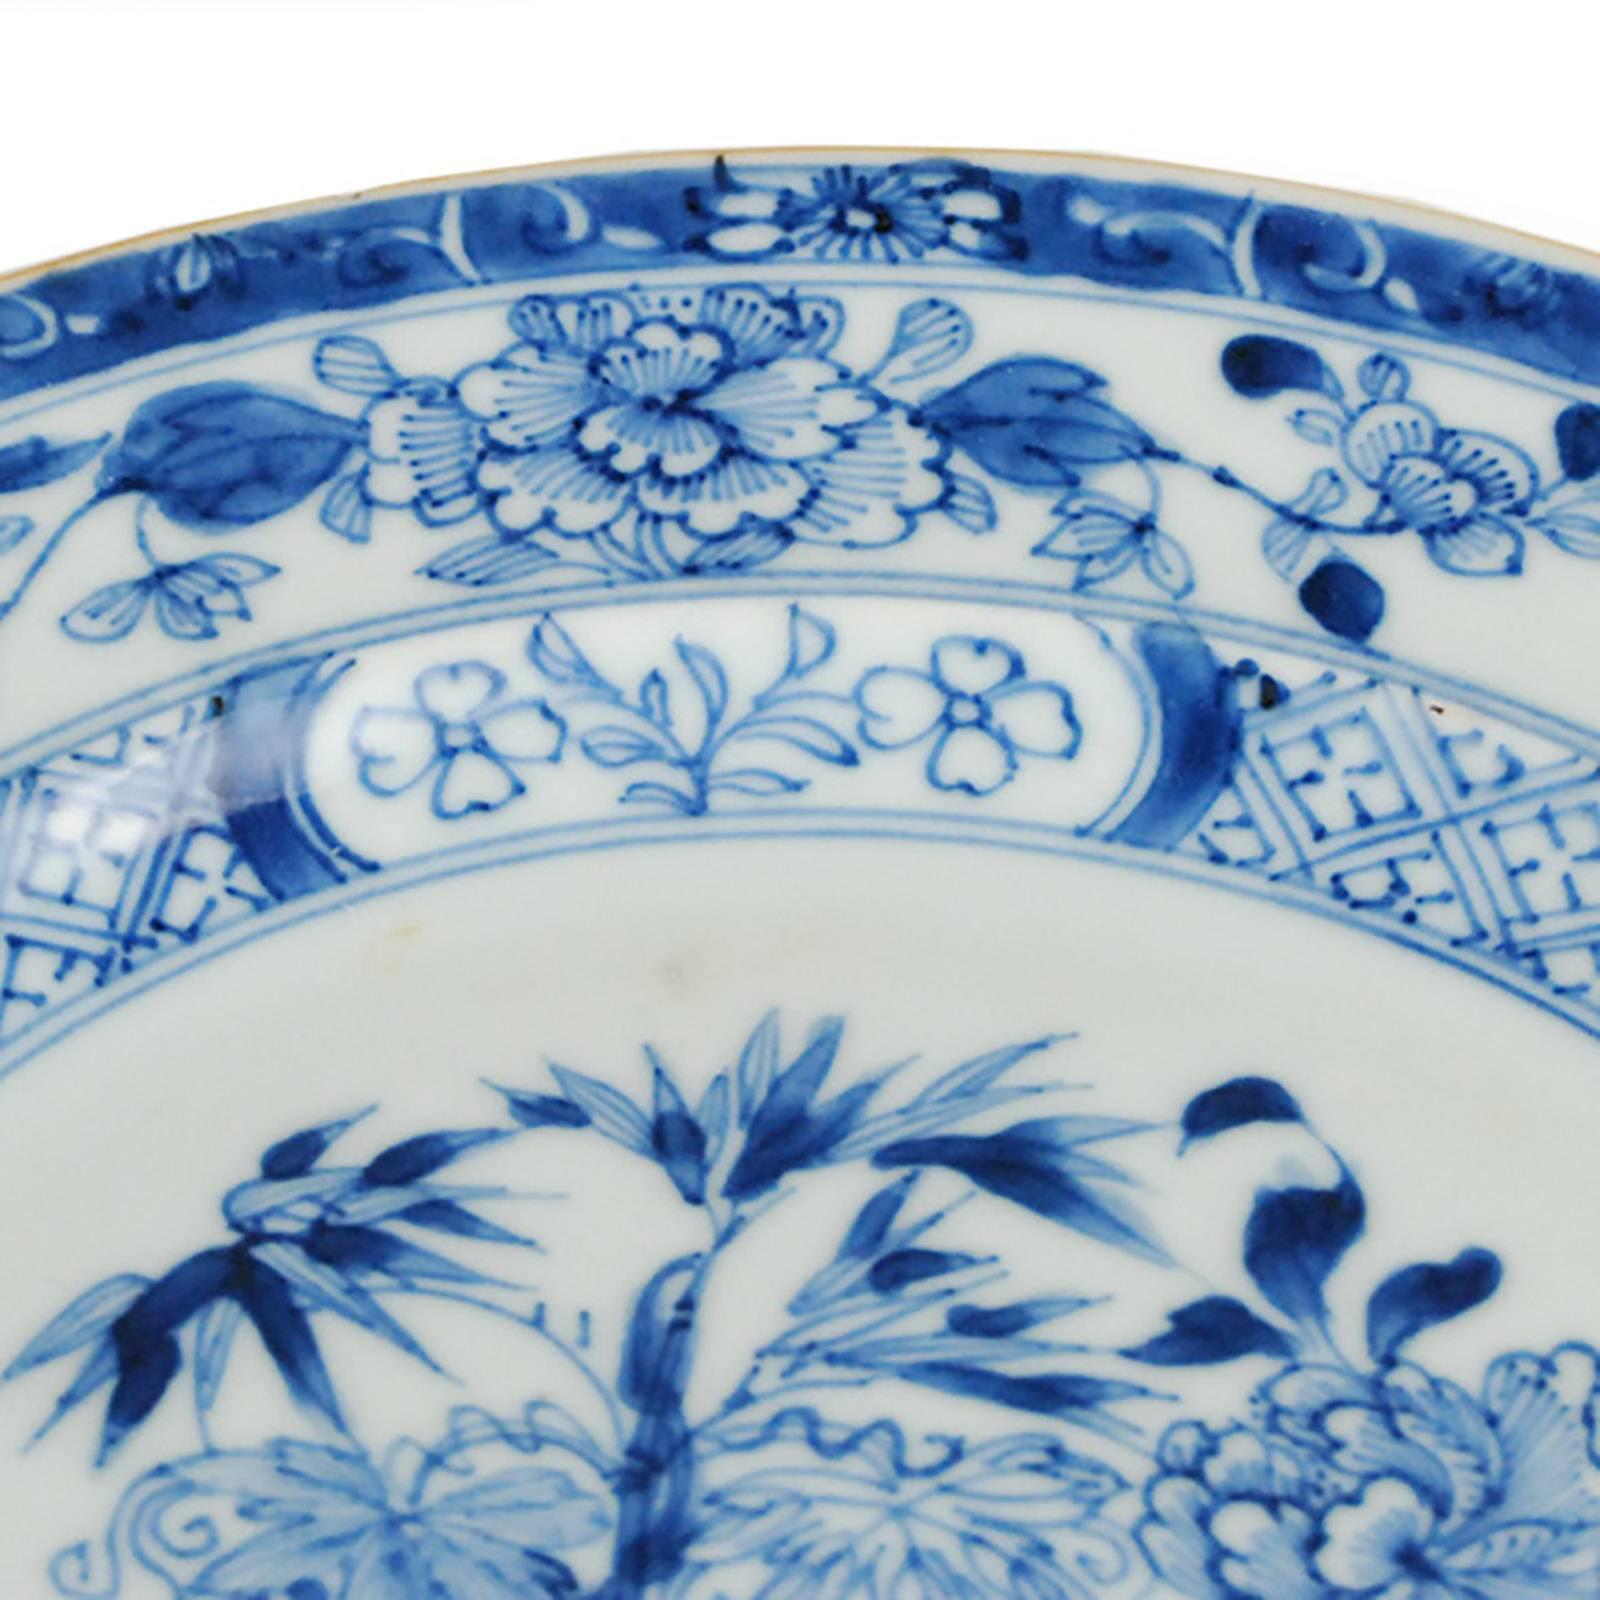 Glazed Chinese Blue and White Plate with Floral Motif